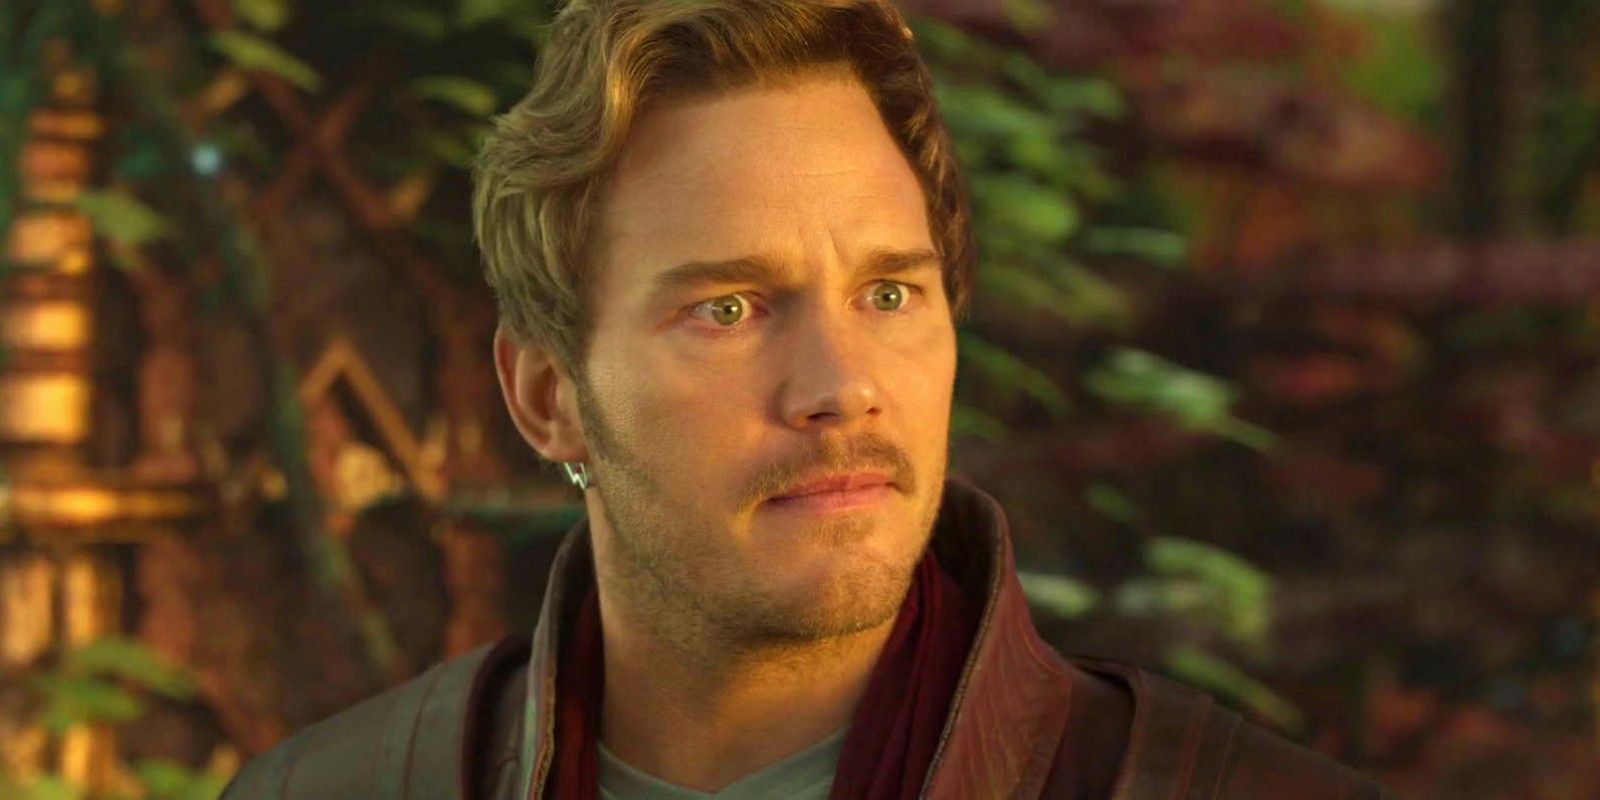 Chris Pratt as Star-Lord in Guardians of the Galaxy 2